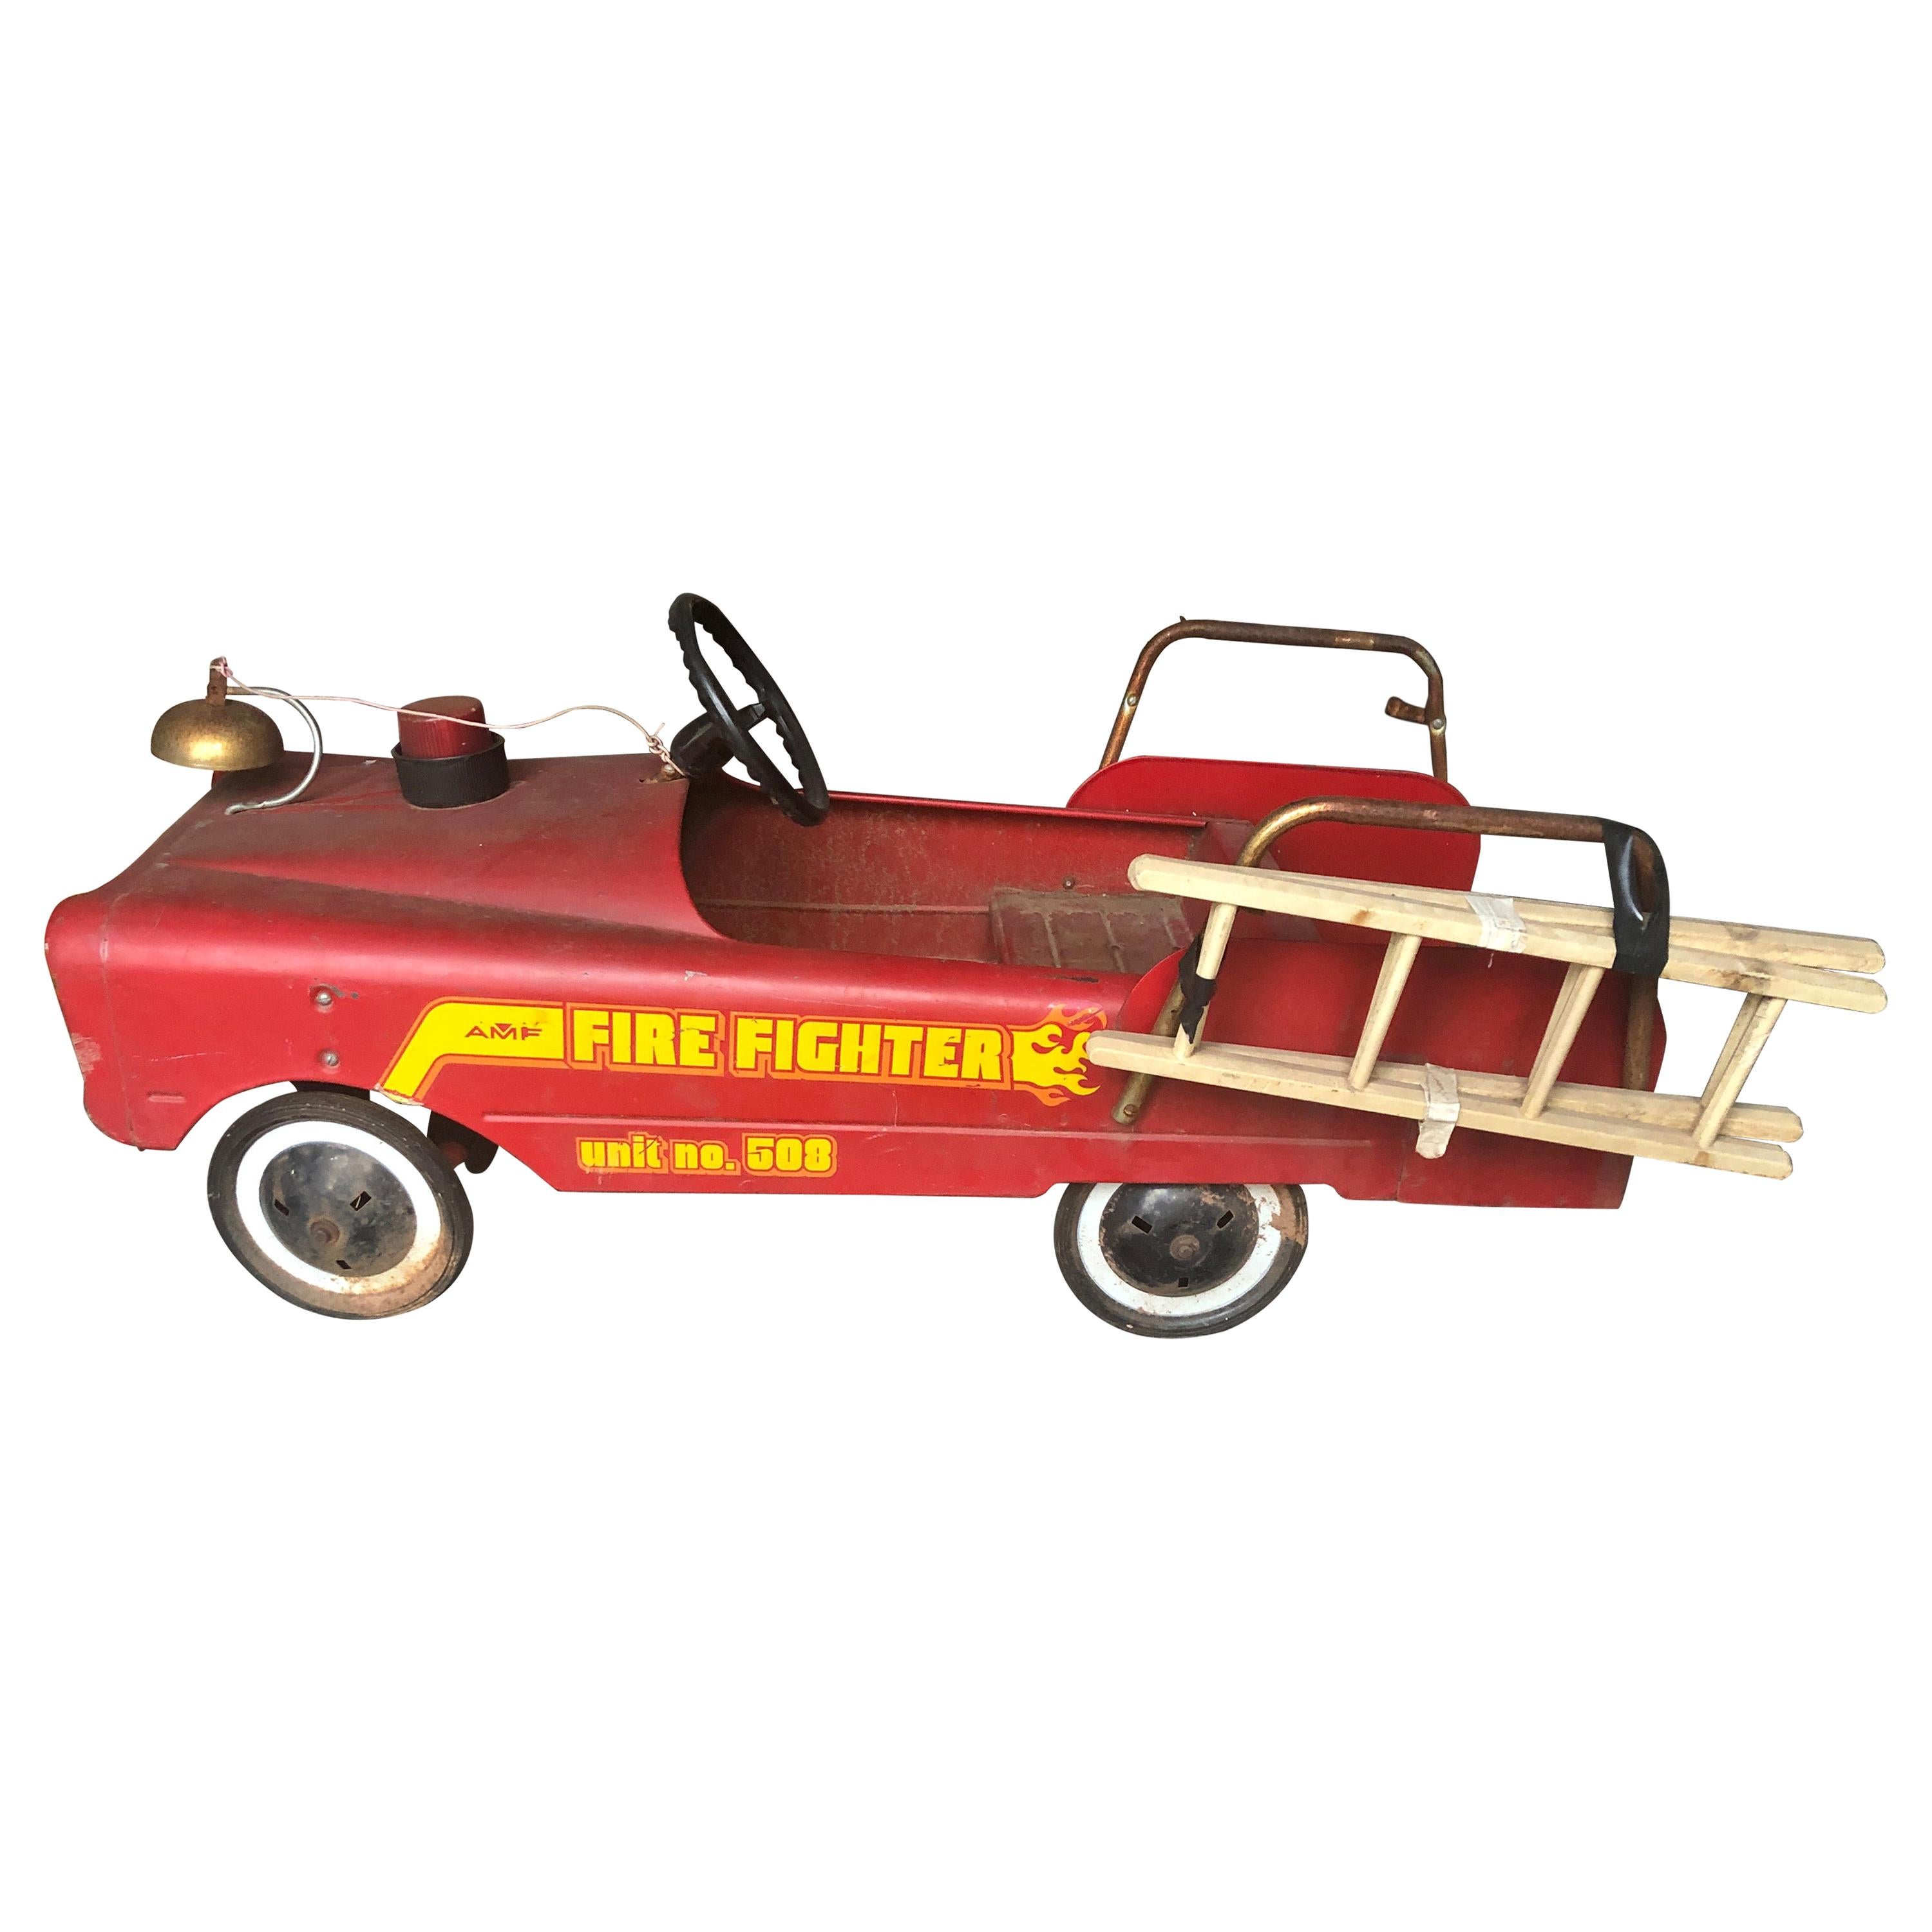 AMF SAD FACE NEW Pedal car wooden ladders set of 2 fire trucks  MURRAY 